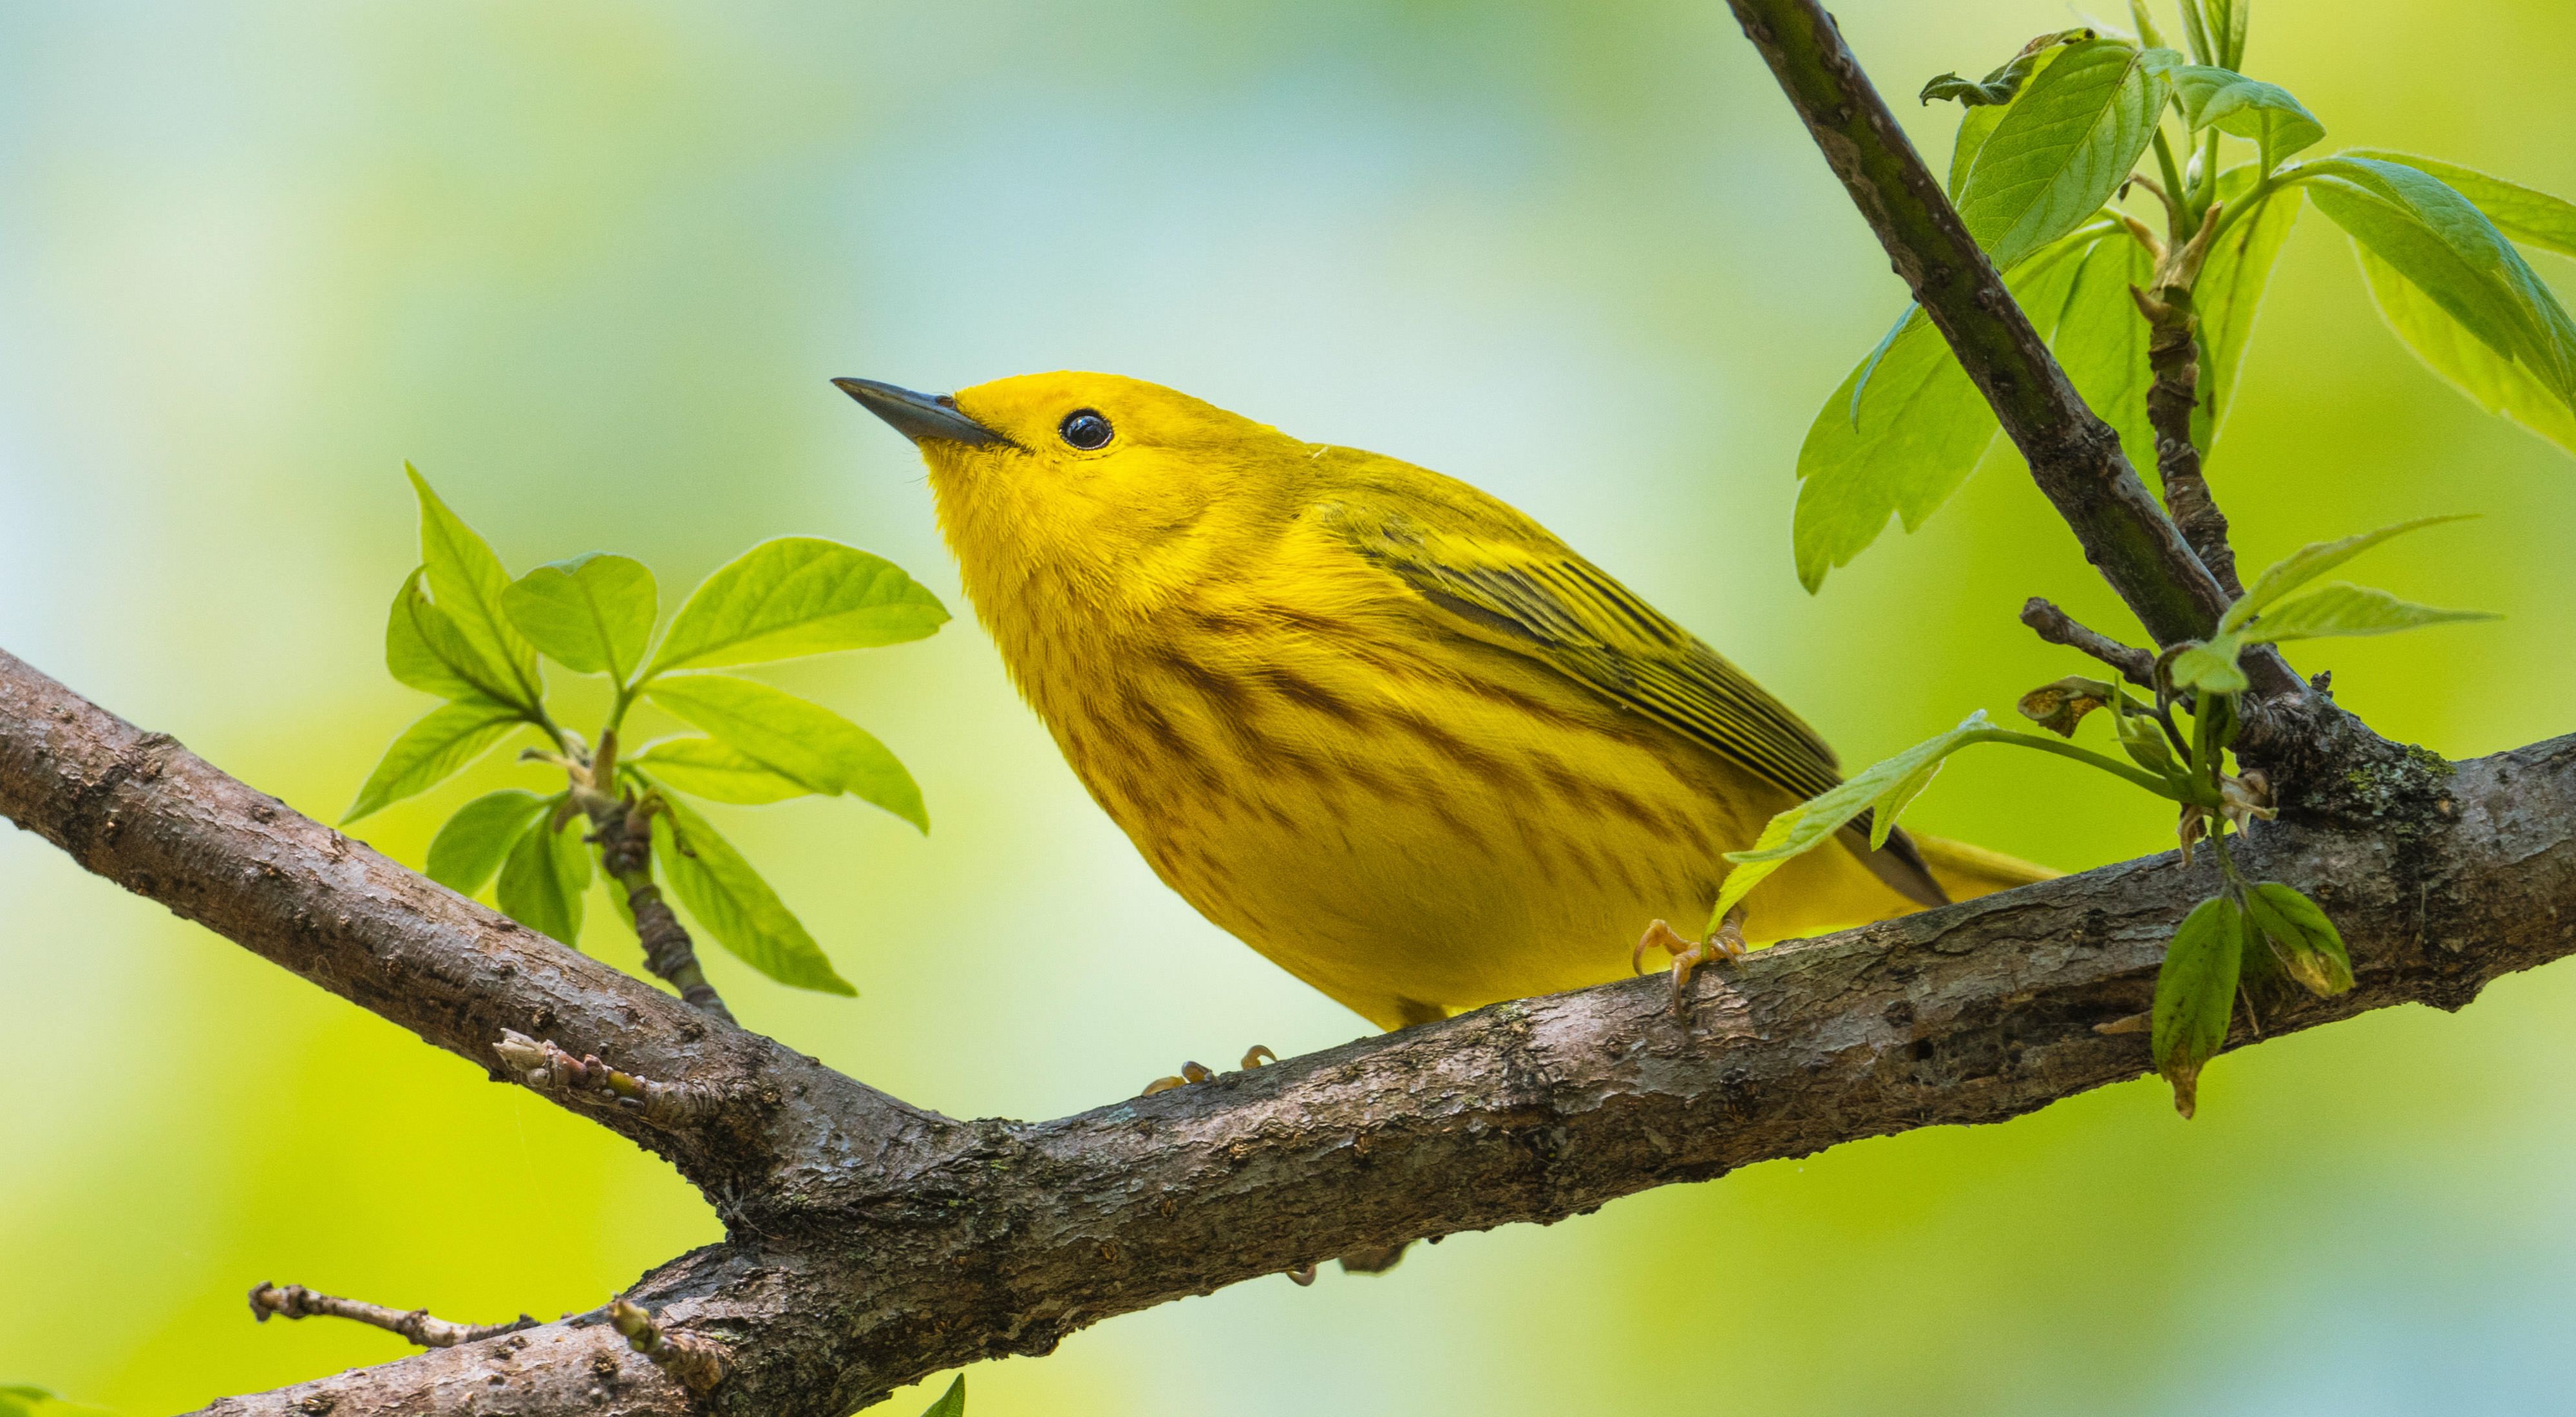 A yellow warbler, a small yellow bird, perches on a tree branch among leaves.